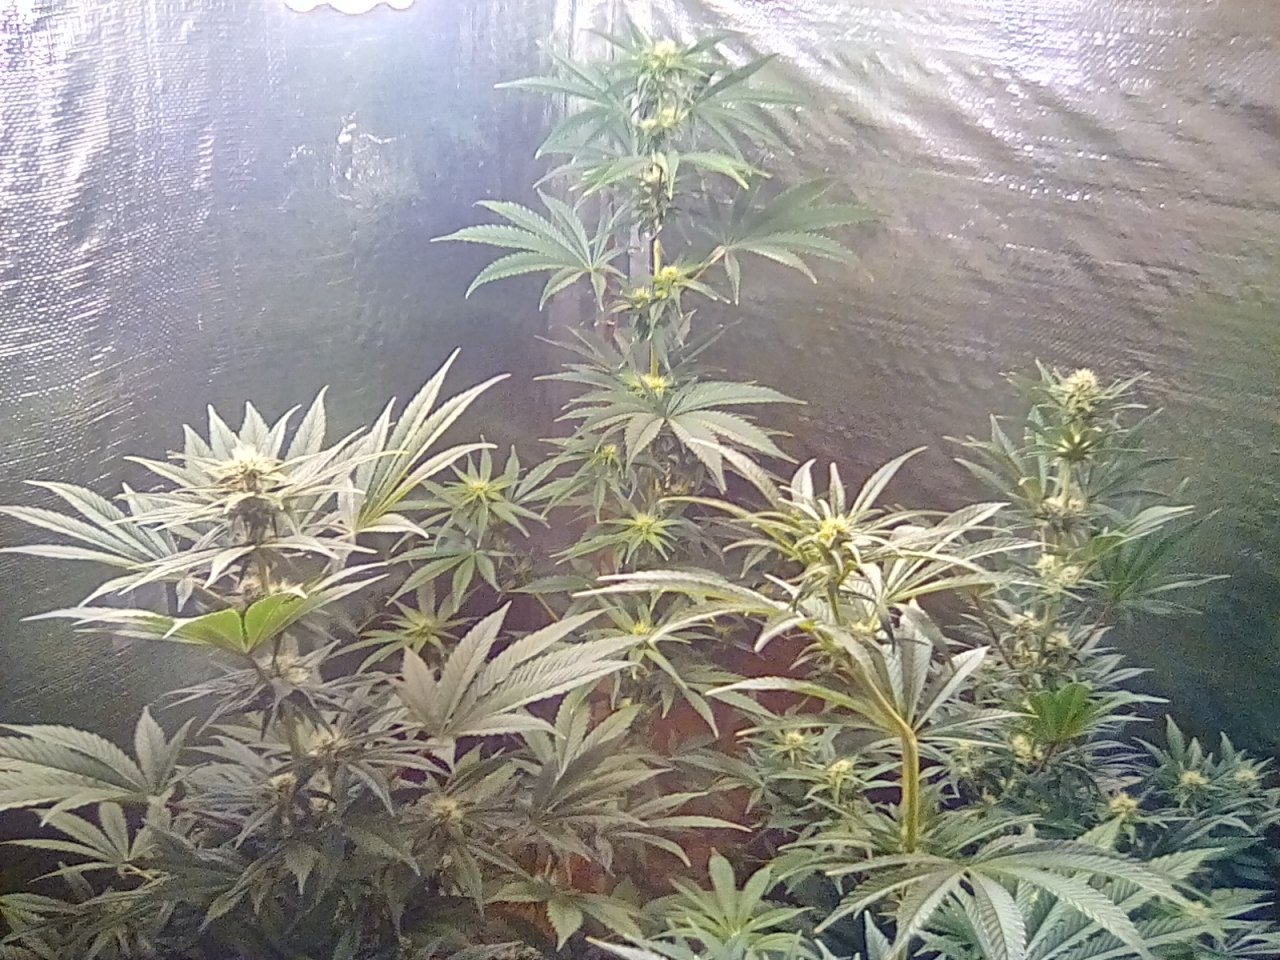 Day 30 and 22 of the flip